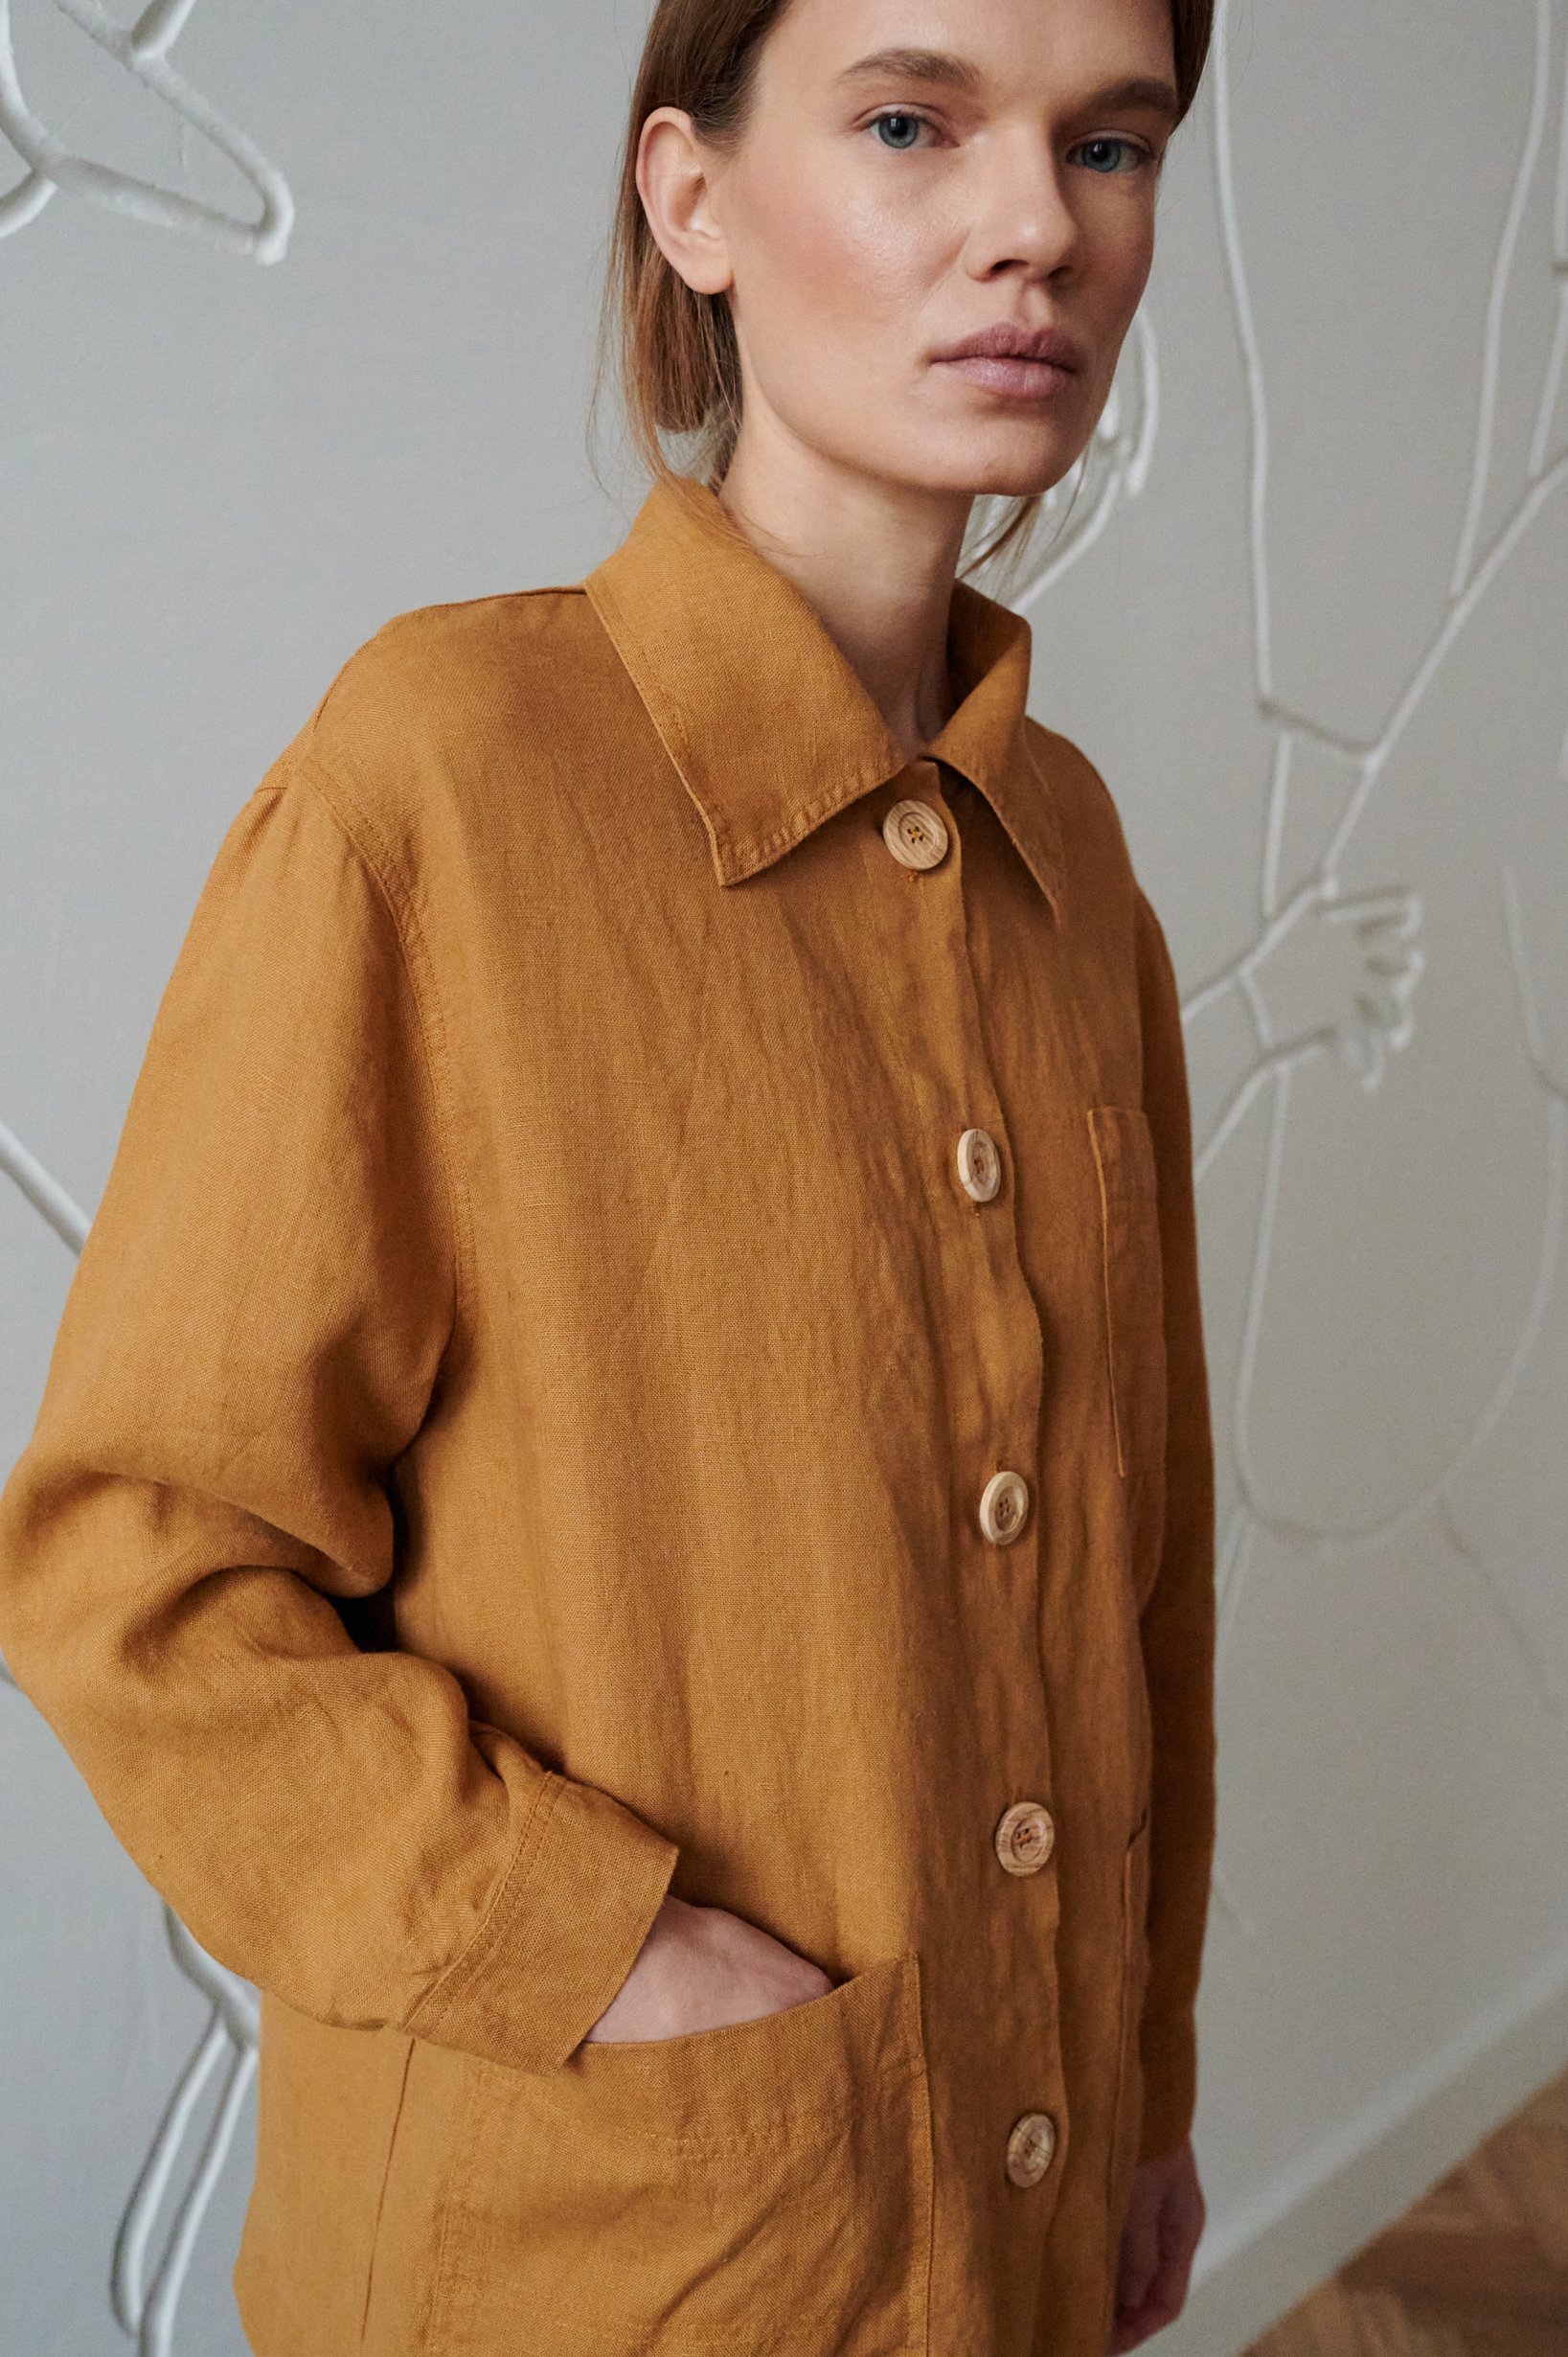 Woman wearing a loose-fitting linen utility jacket with wooden buttons